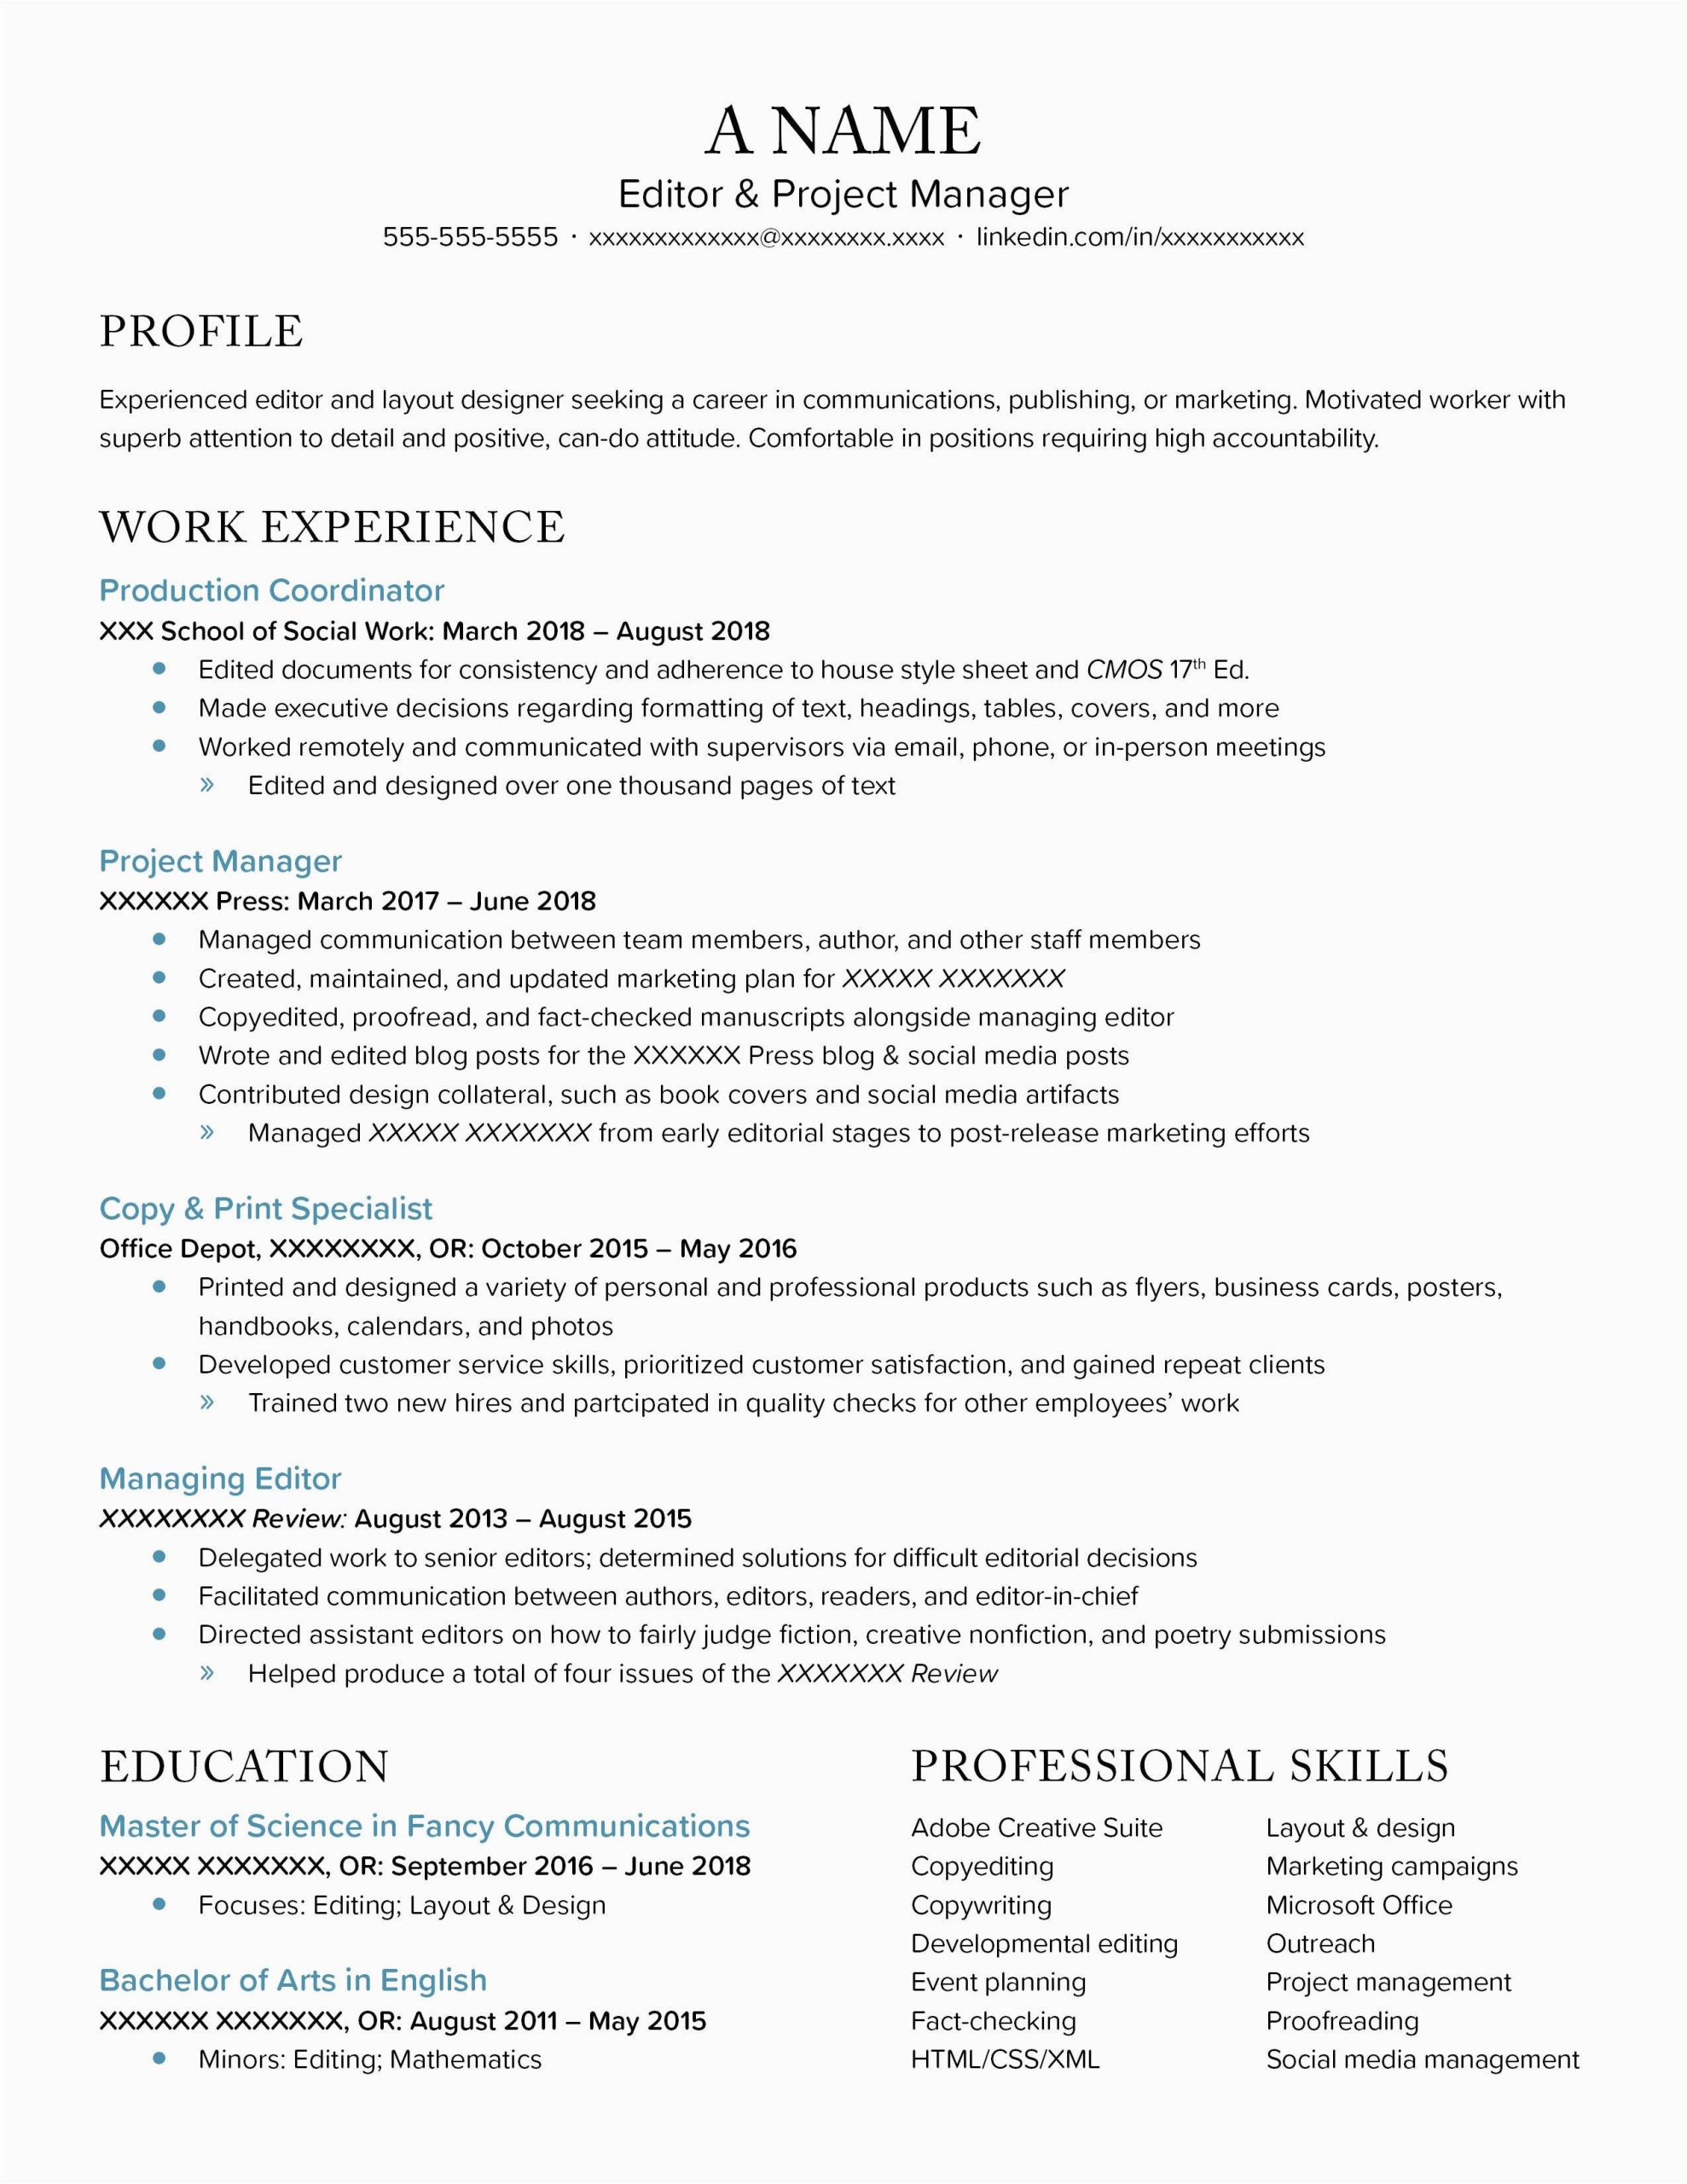 Sample Resumes for Degree Holders Change Of Field Recently Graduated with My Master S Degree Resume isn T Ting Much